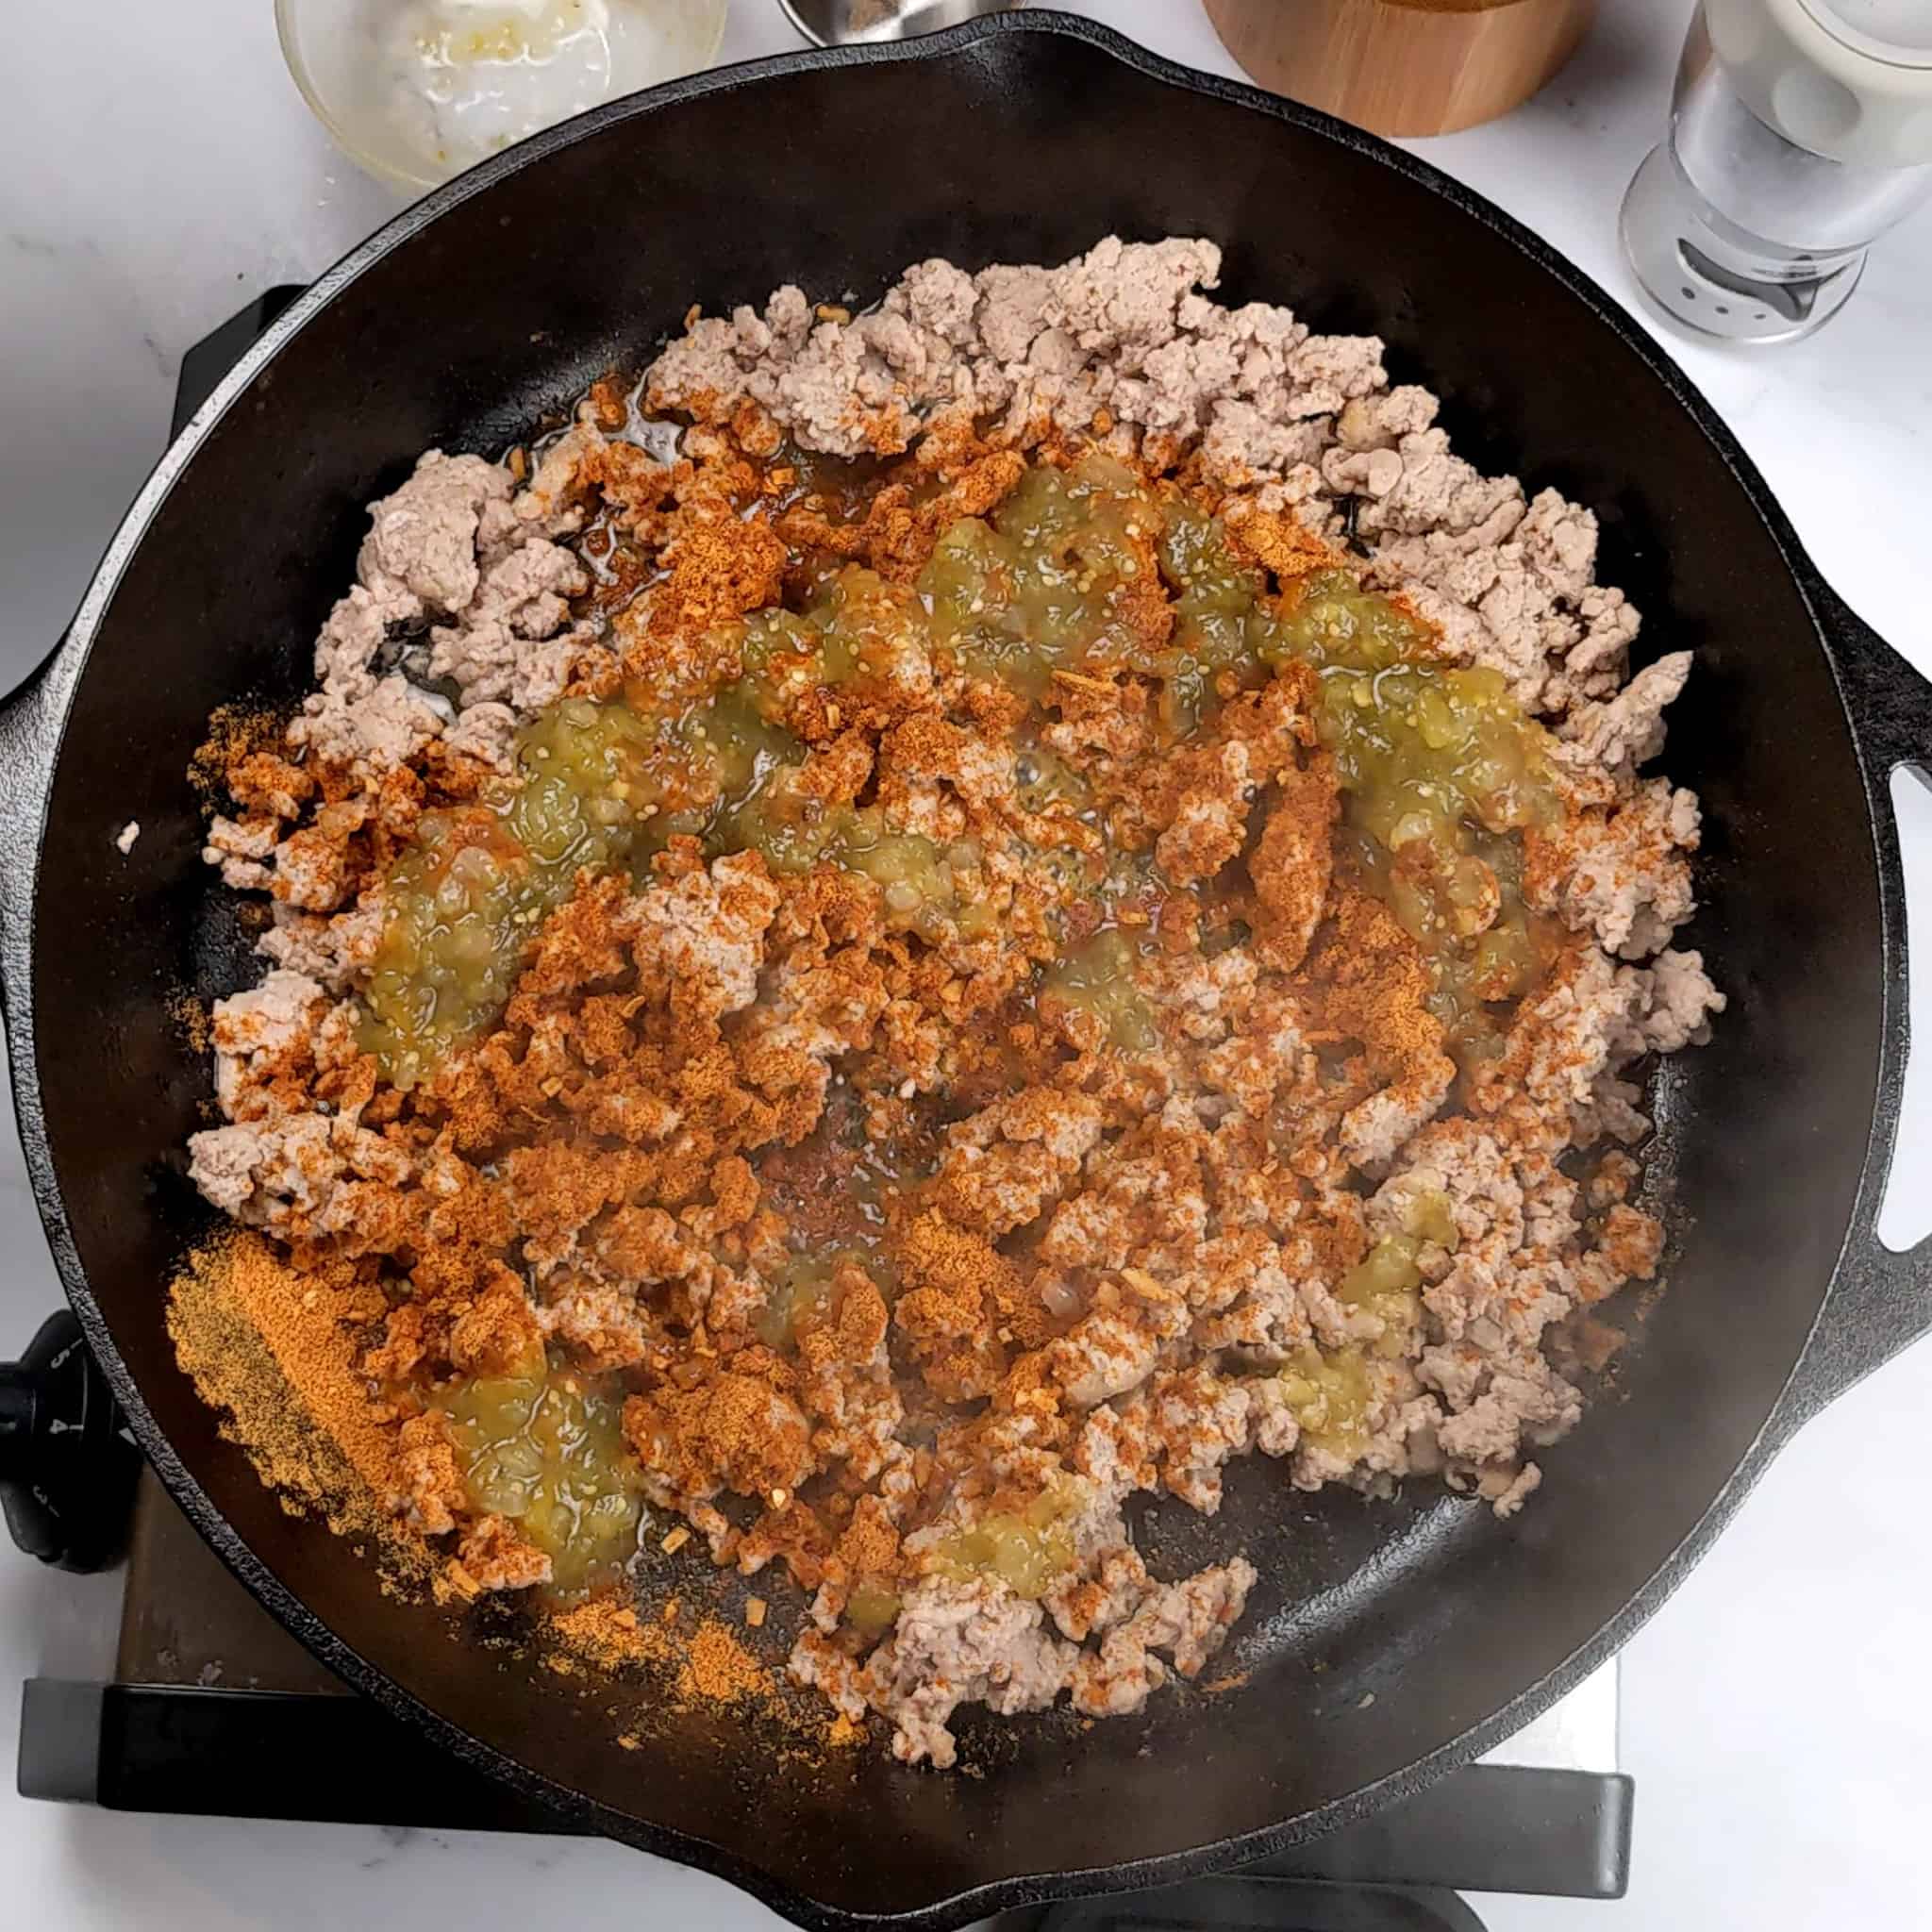 salsa verde adnd taco seasoning covering cooked crumbled ground turkey in a cast iron skillet.